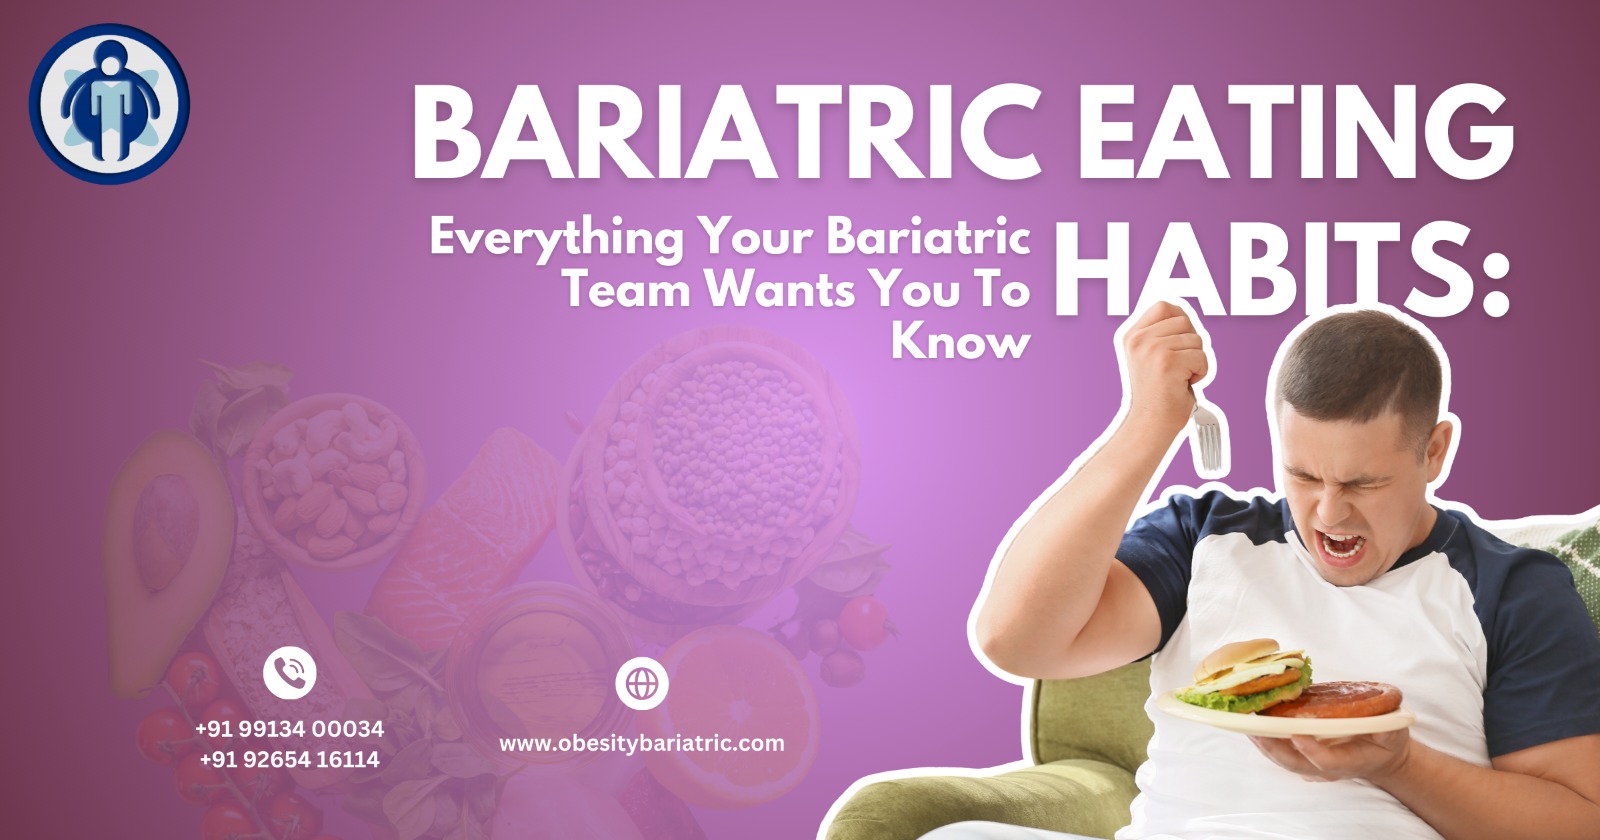 Bariatric Eating Habits: Everything Your Bariatric Team Wants You To Know